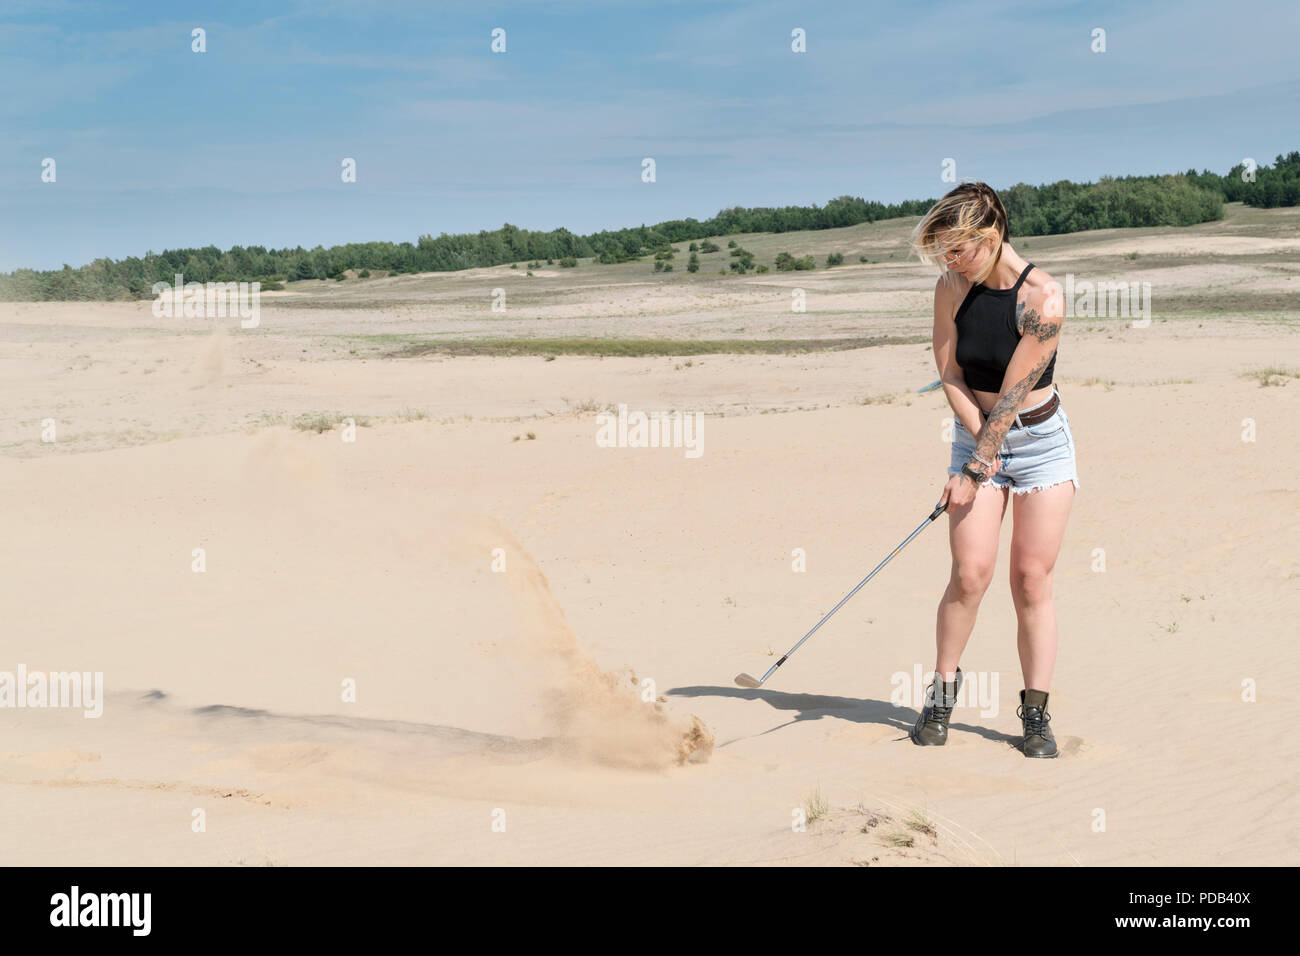 Woman is hitting with a golf club Stock Photo